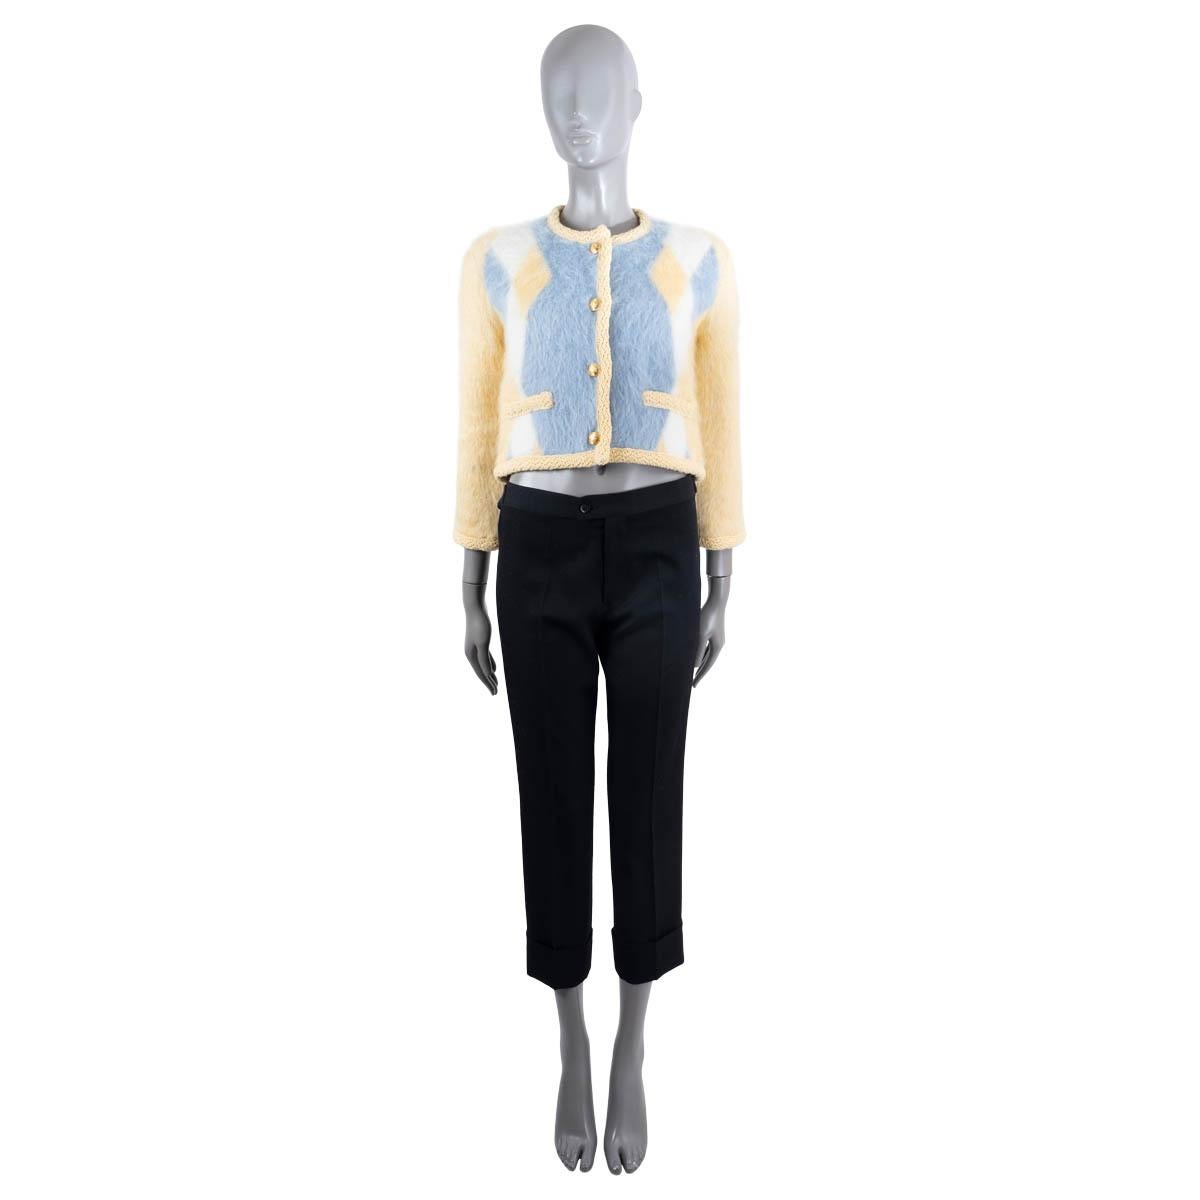 100% authentic Celine Chasseur knit jacket in yellow, baby blue and white brushed mohair (51%), polyamide (31%), wool (14%) and polyester (4%). Features a cropped silhouette, crochet trim in yellow and two slit pockets at the waist. Closes with